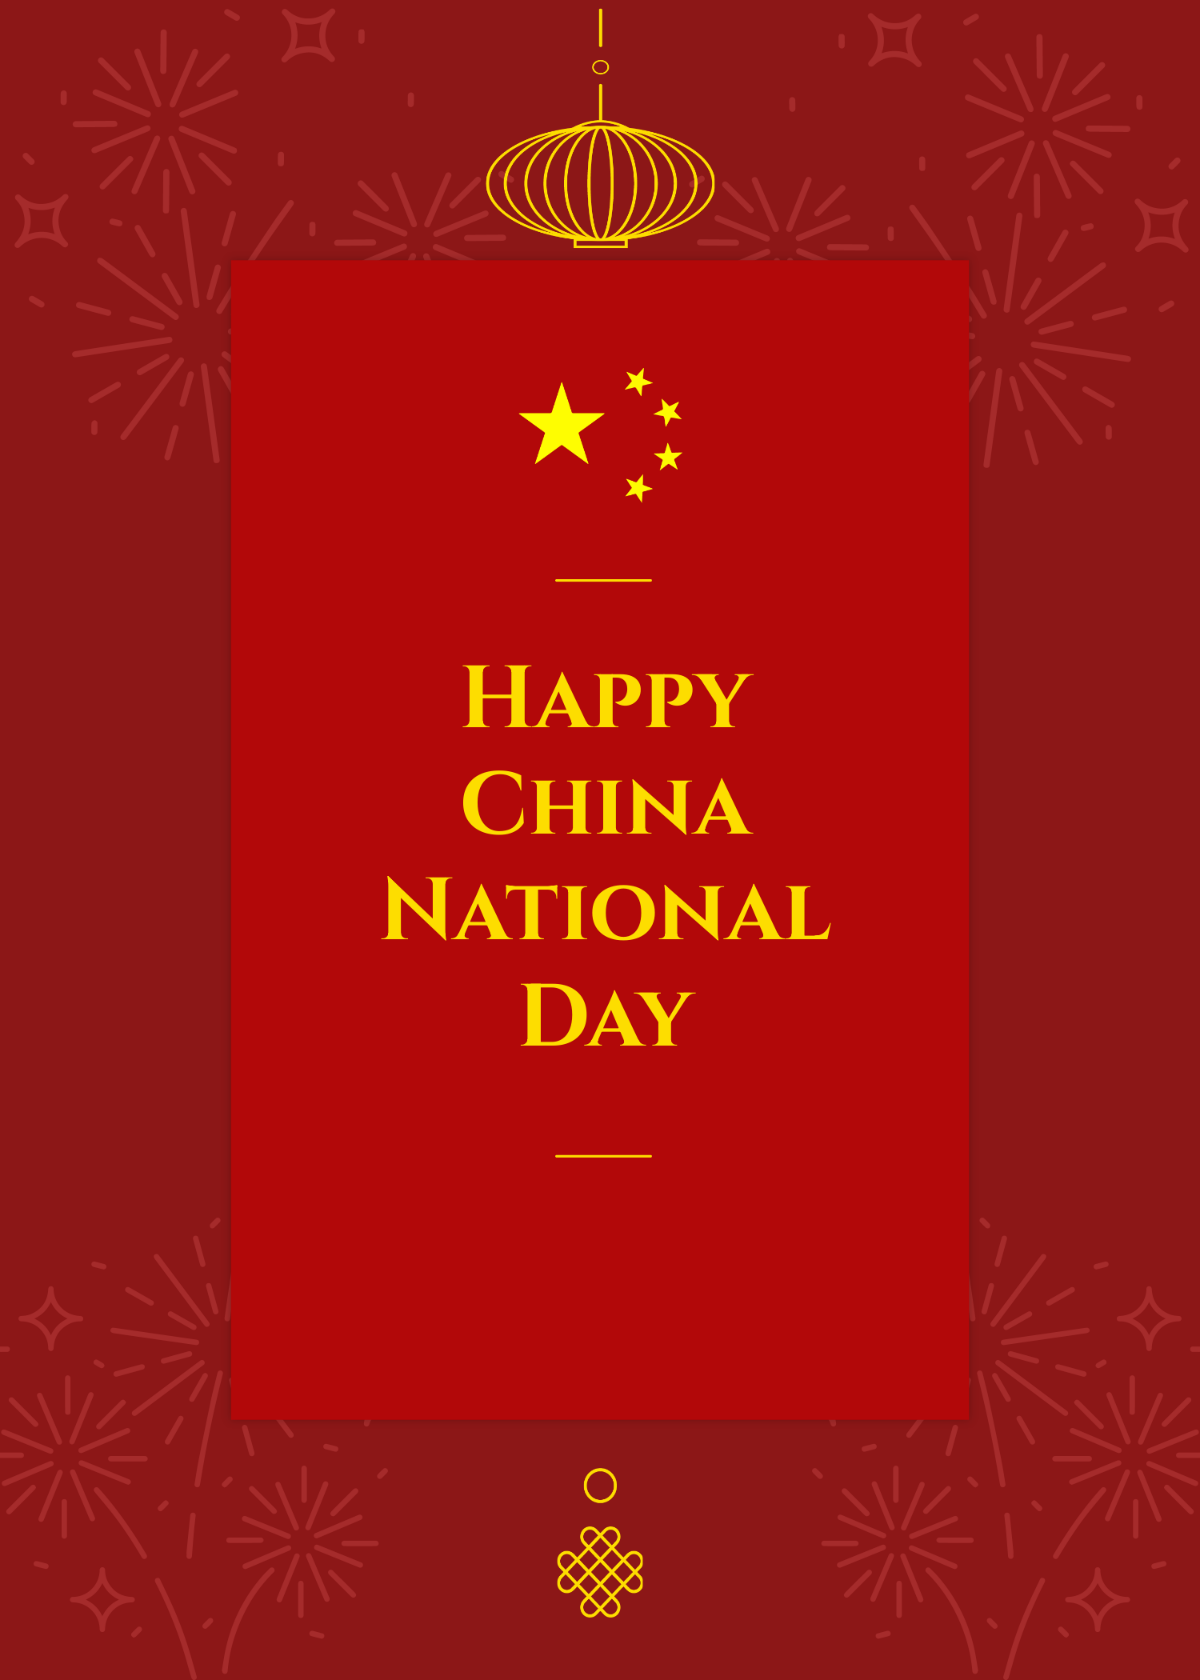 China National Day Greeting Card Template